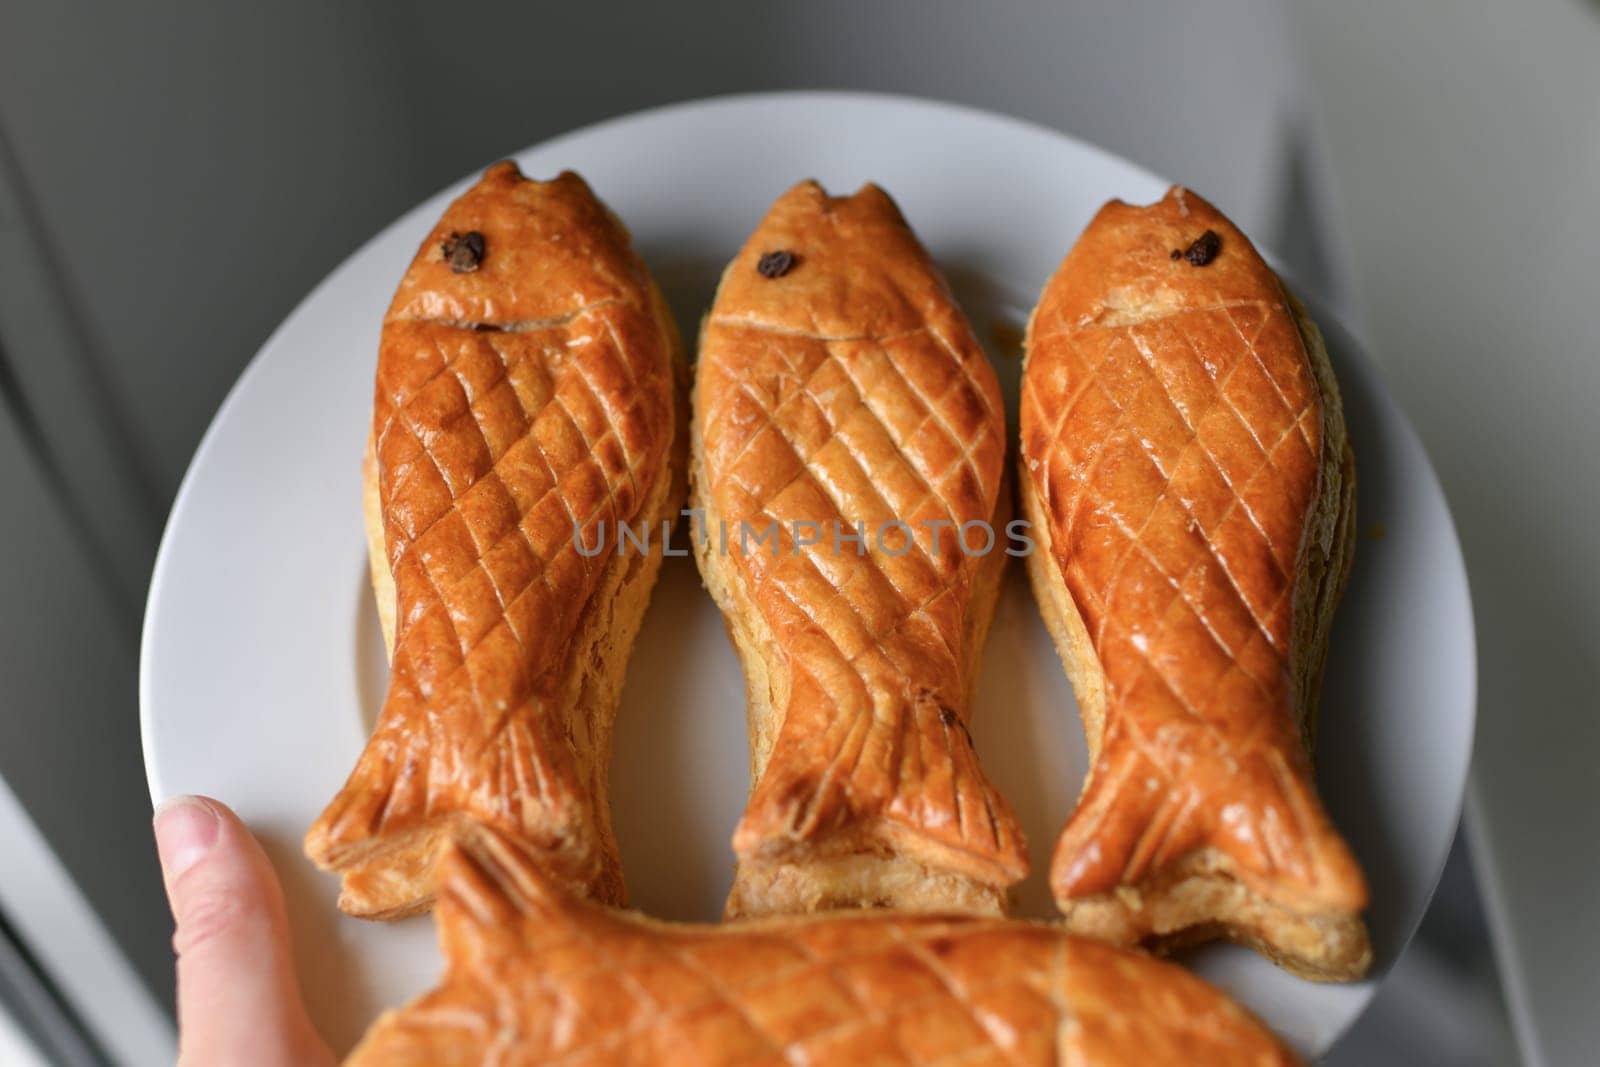 Fish from puff pastry in the store on April Fool's Day